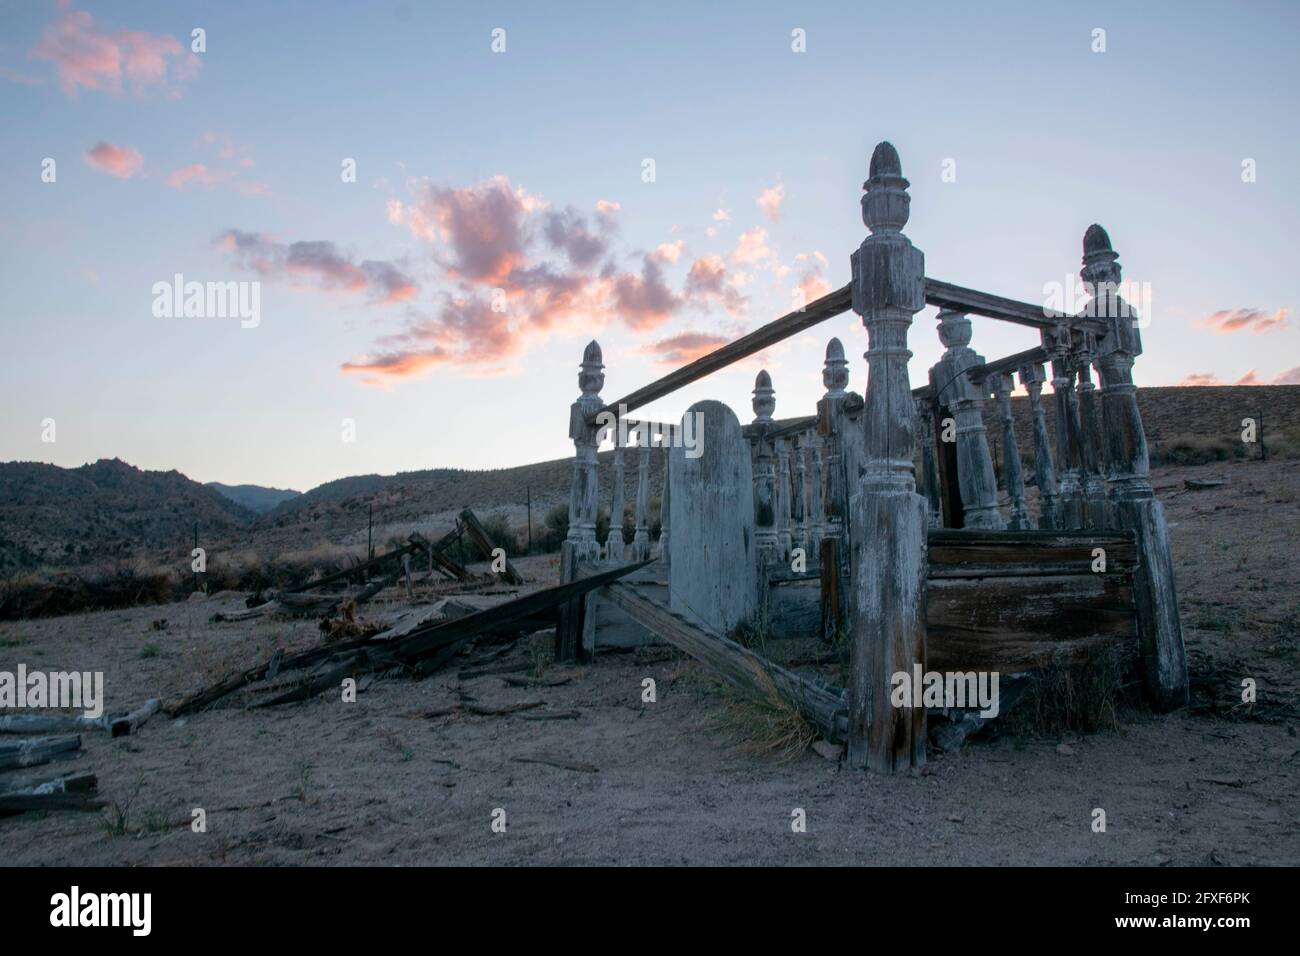 Benton Hot Springs is a silver mining ghost town in Mono County, CA, USA where travelers can sit in hot springs. Stock Photo